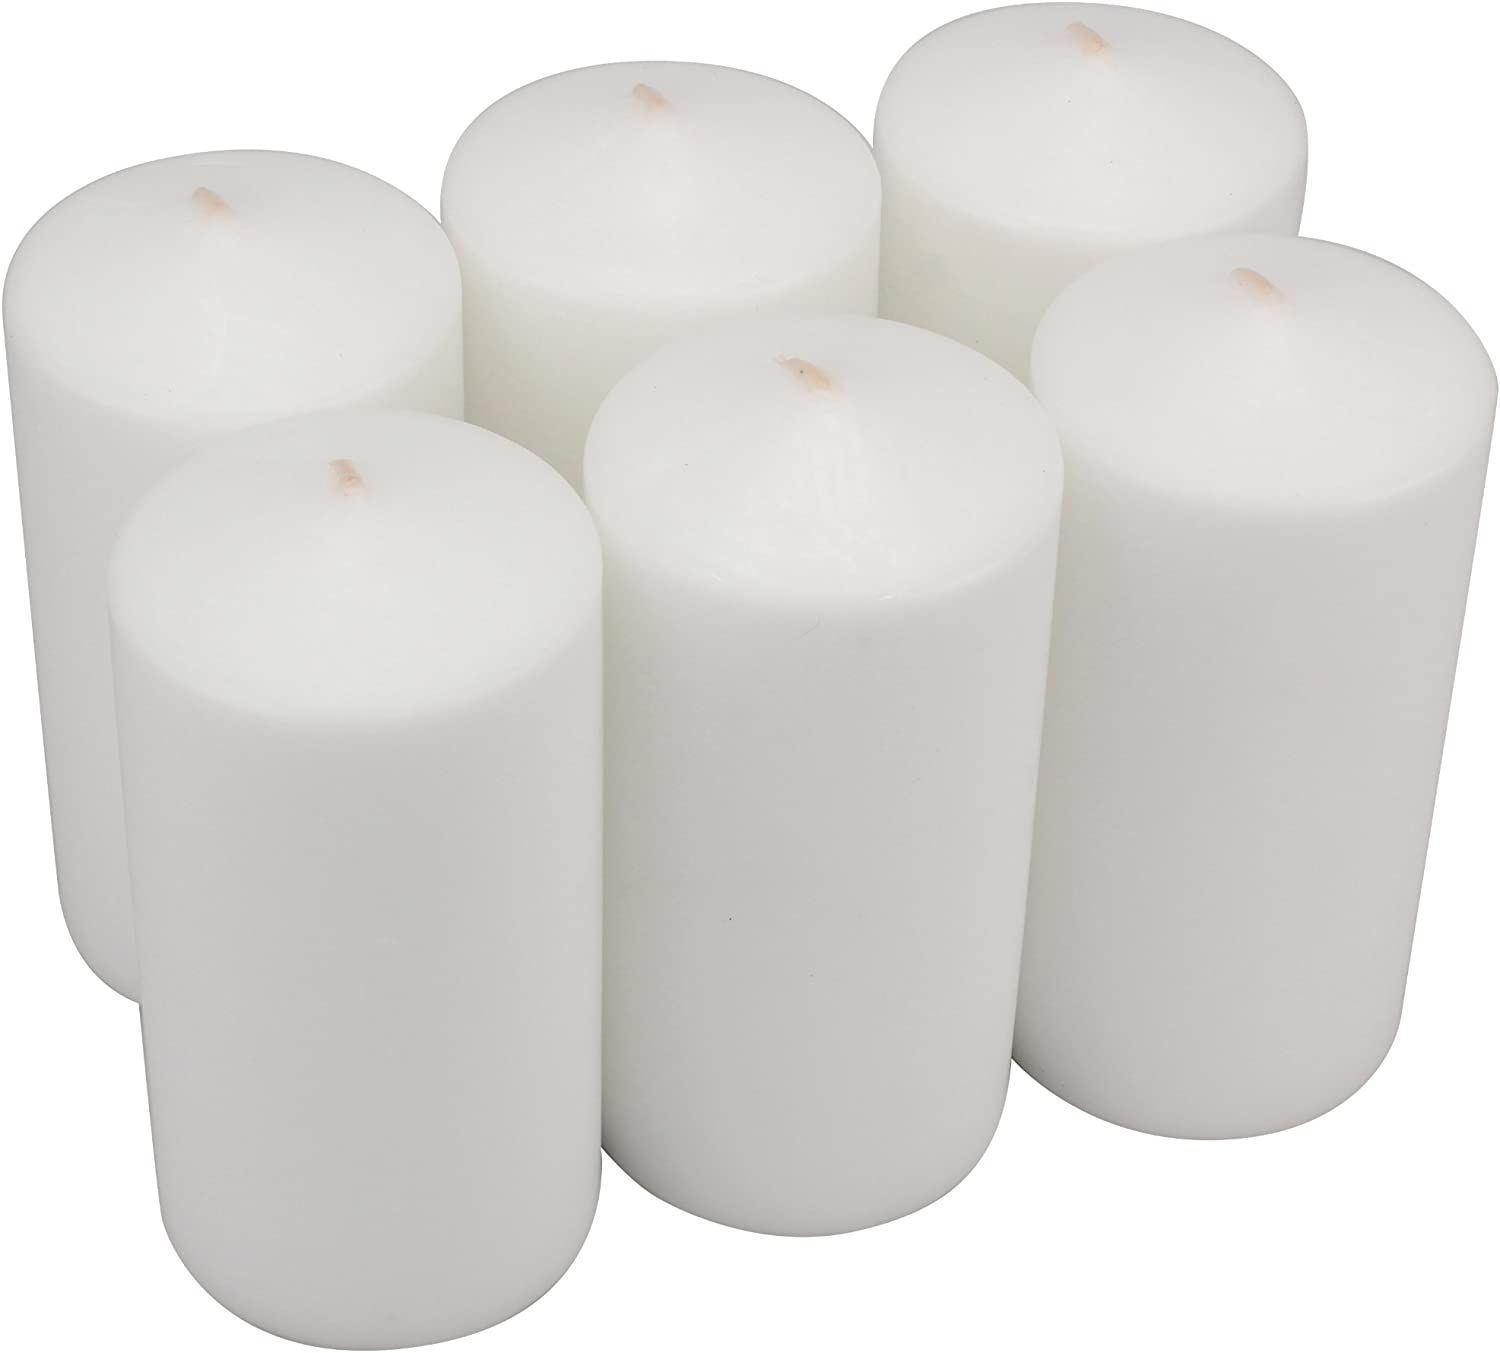 Stonebriar Tall 3x6 Inch Unscented Pillar Candles,White, 6 count | Amazon (US)